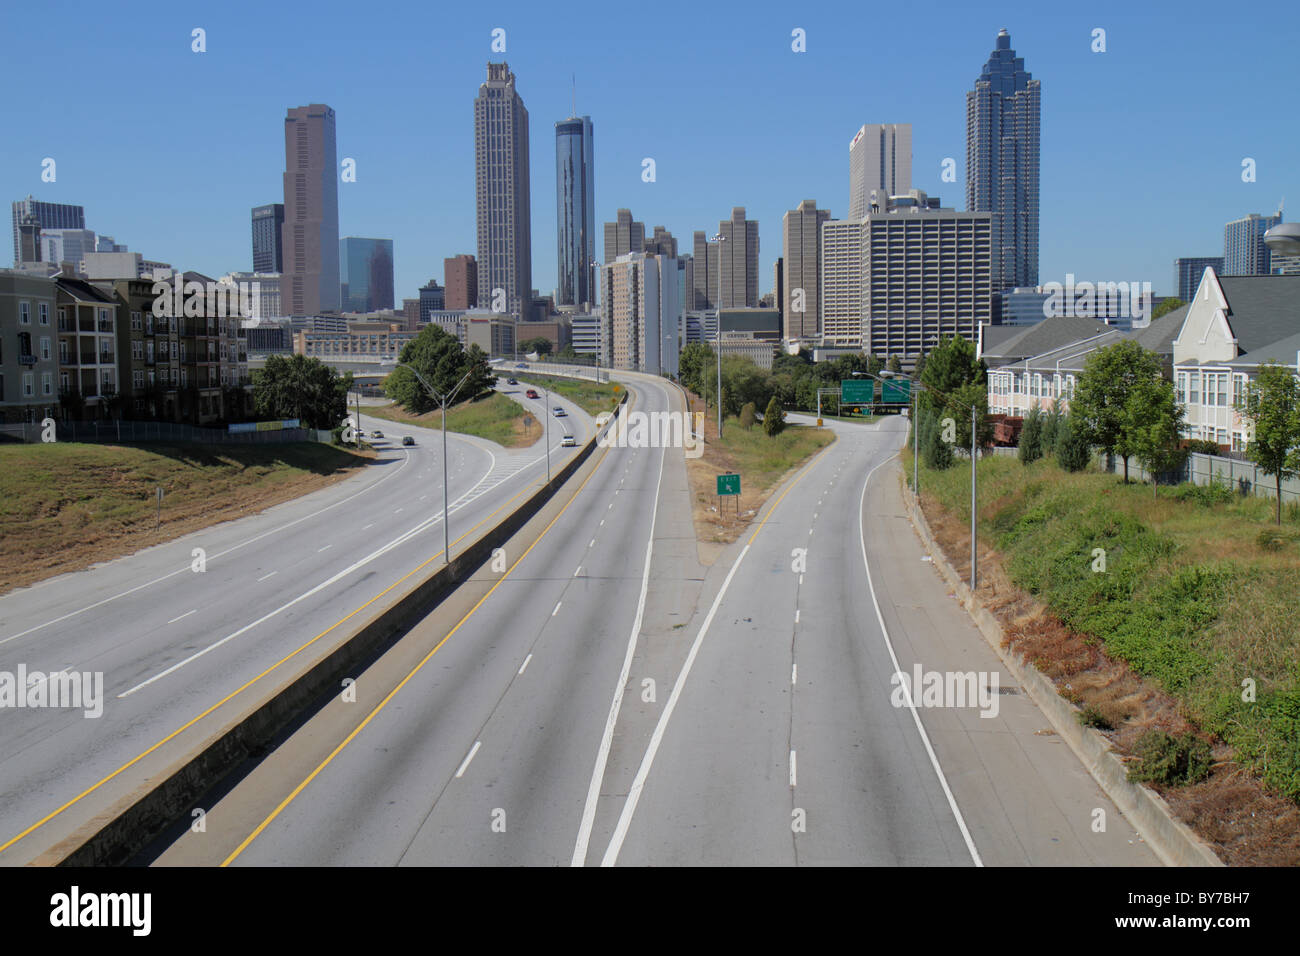 Atlanta Georgia,Freedom Parkway,downtown,skyline,high rise skyscraper skyscrapers building buildings divided highway,expressway,roadway,transportation Stock Photo